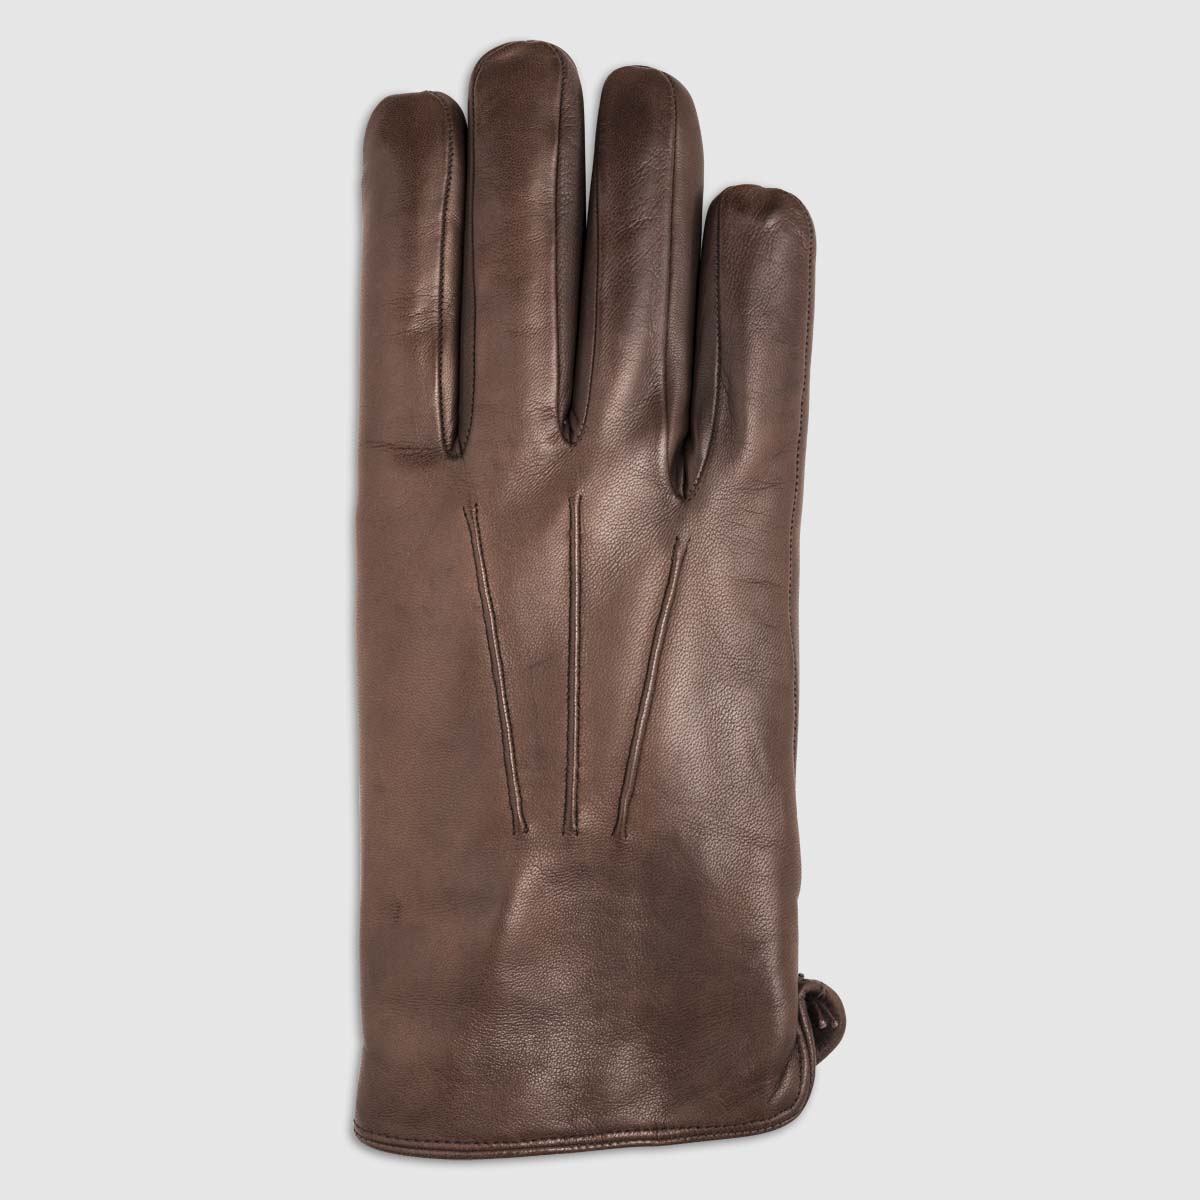 Nappa Leather Glove with Lapin Lining in Brown – 8